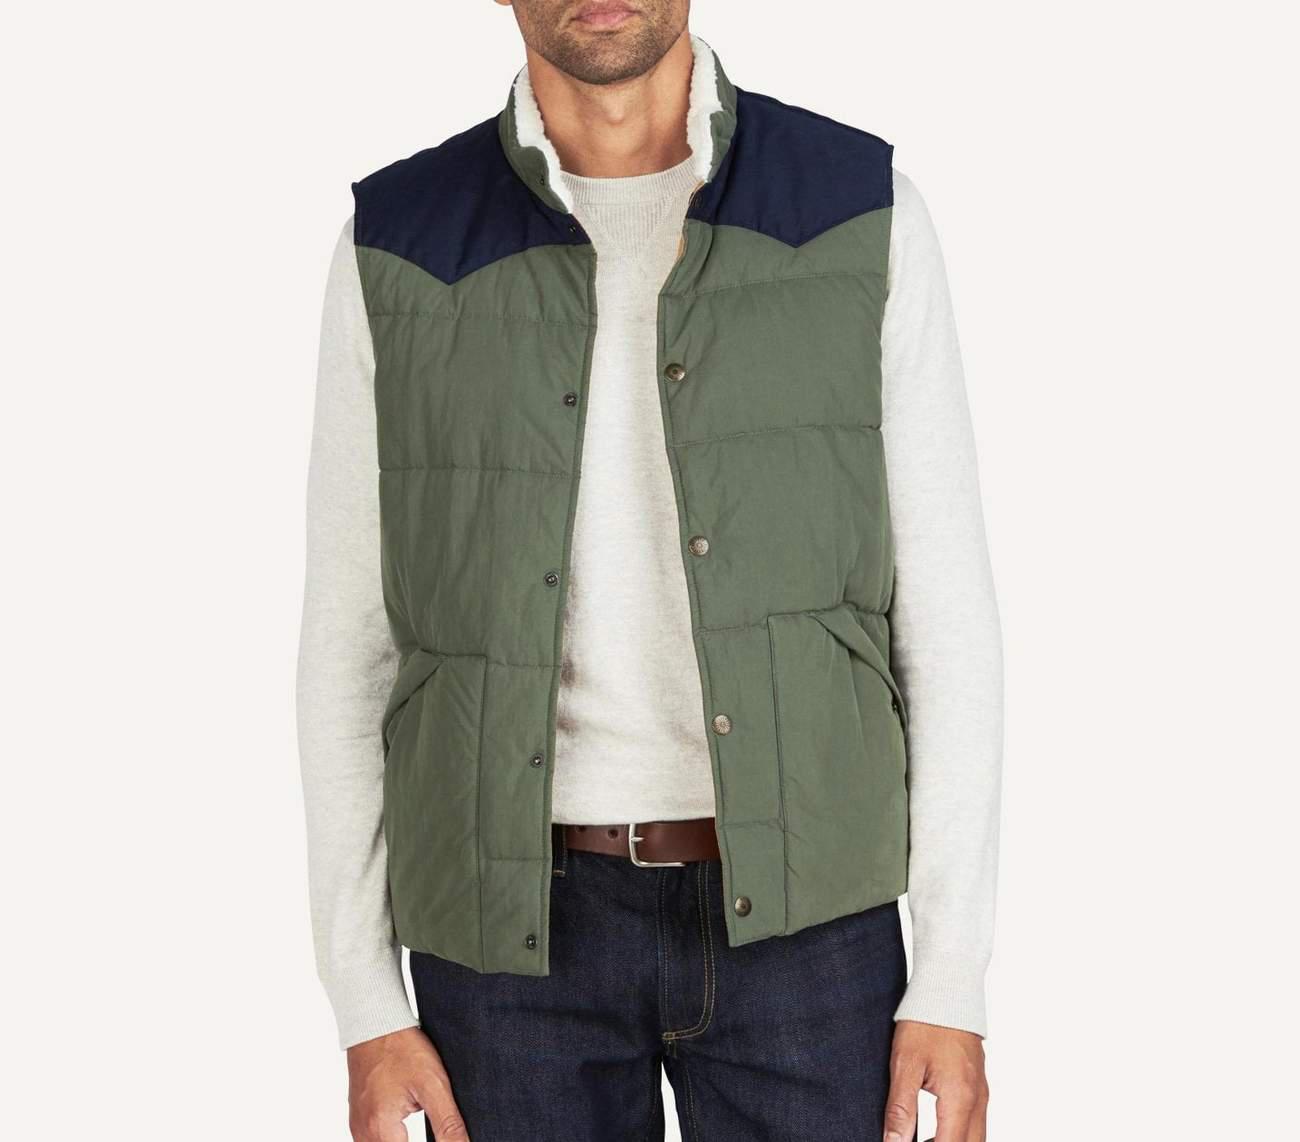 Man Outfitters - This Week's Handpicked Item | Modvisor